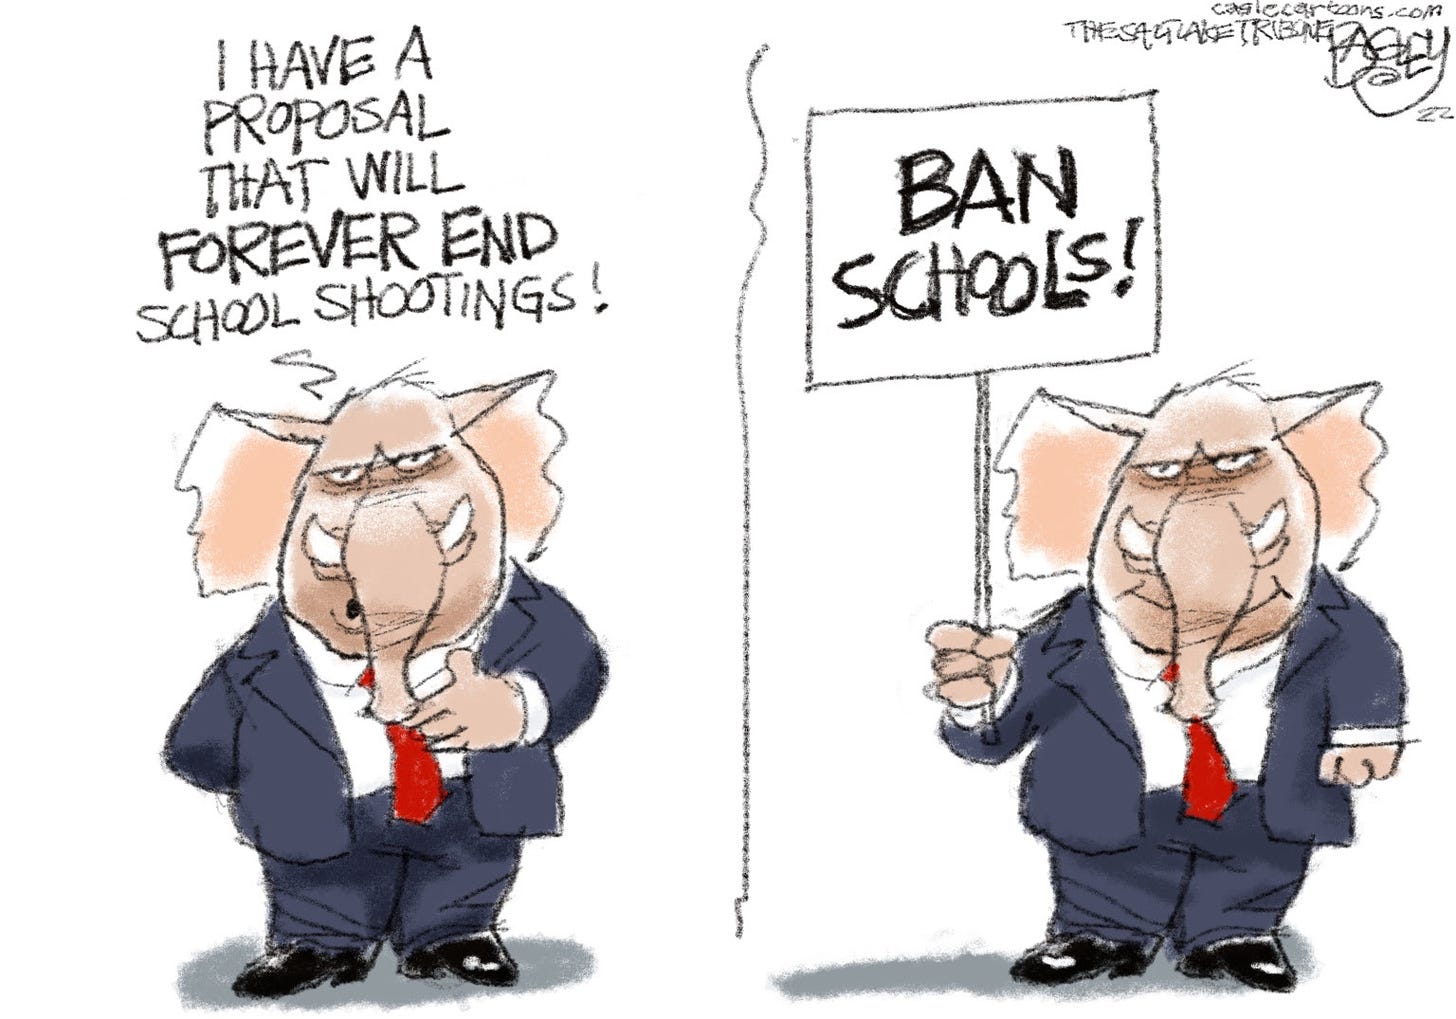 Republicans refuse to ban guns behind mass shootings but cut funding for schools